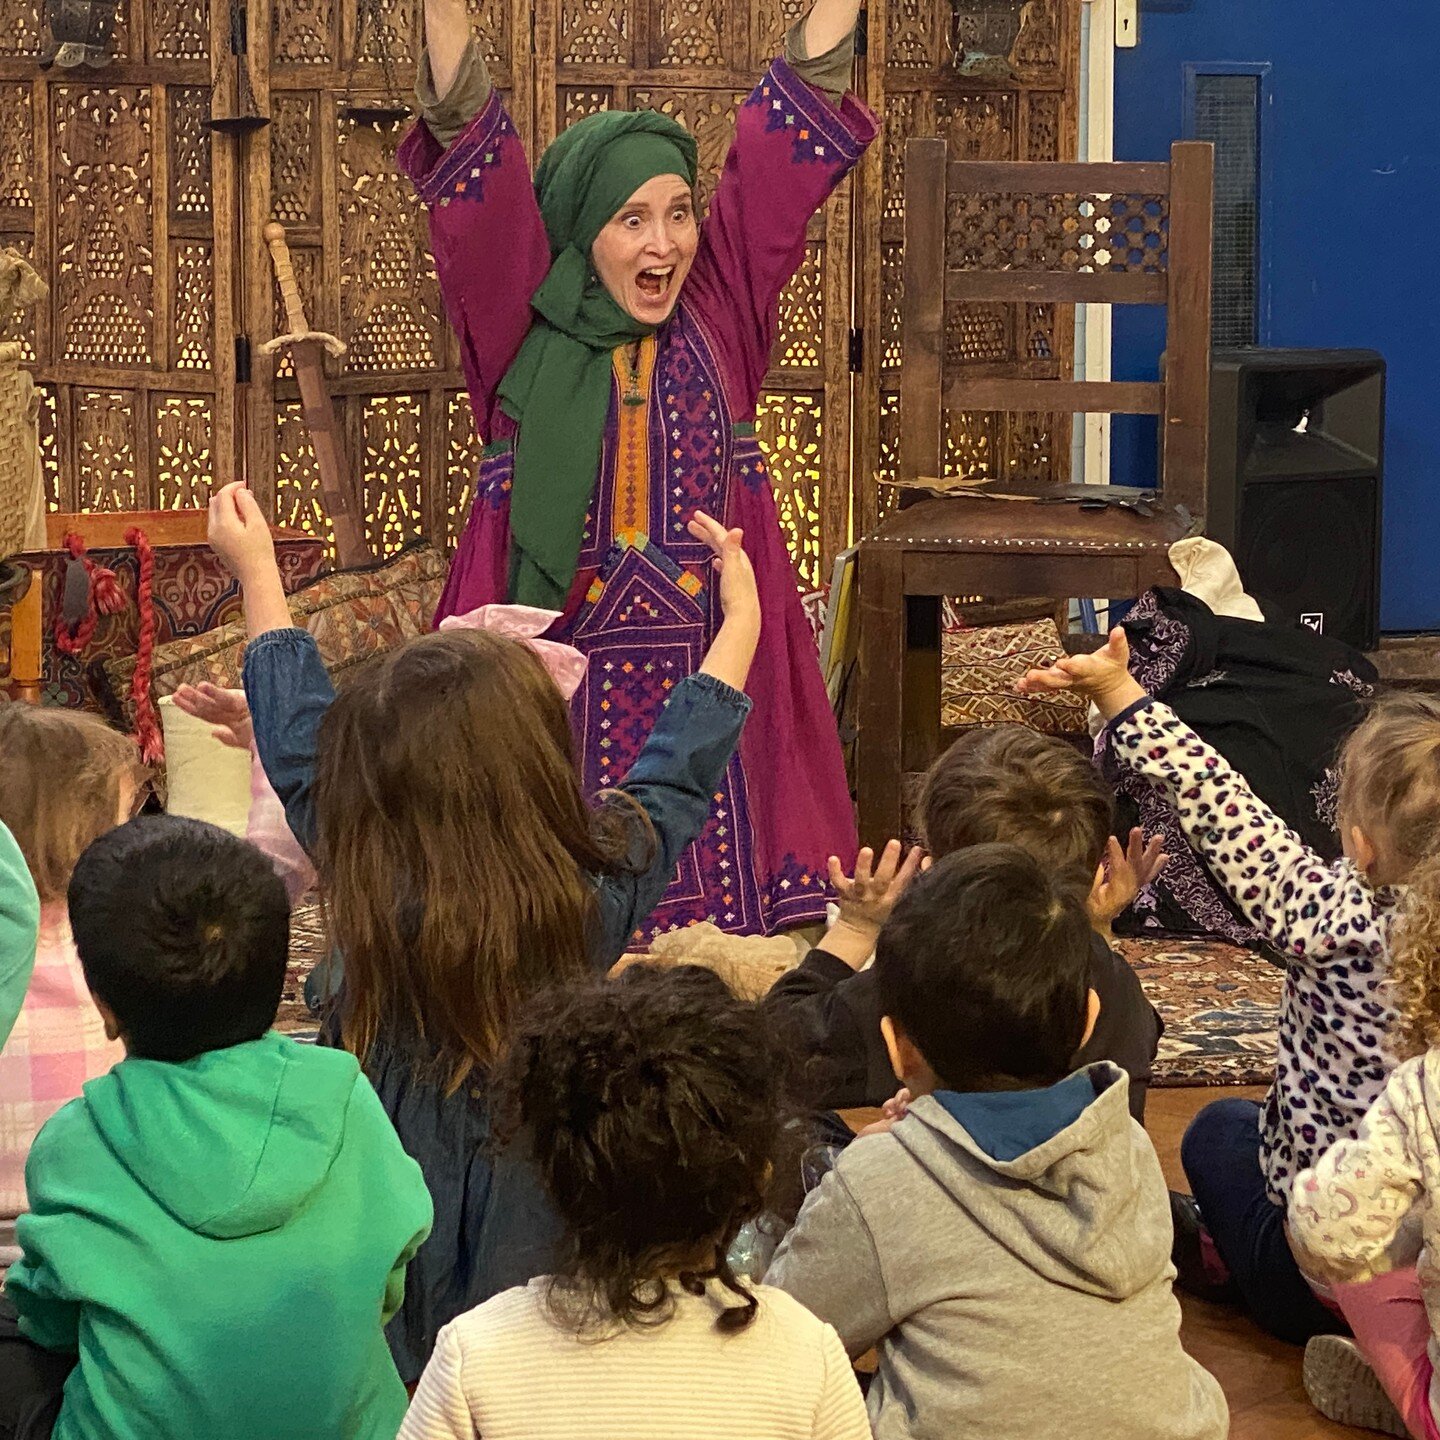 Nursery pupils at Manorside Primary in Finchley, N London enjoy tales of #wisdom #wonder #wit from #MuslimHeritage #Rumi #Tunisia #Pakistan #Joha #Hodja #MullaNasruddin this morning. #TheatreWithoutWalls supported by @theprincesfund
 @WestonFdn #lear